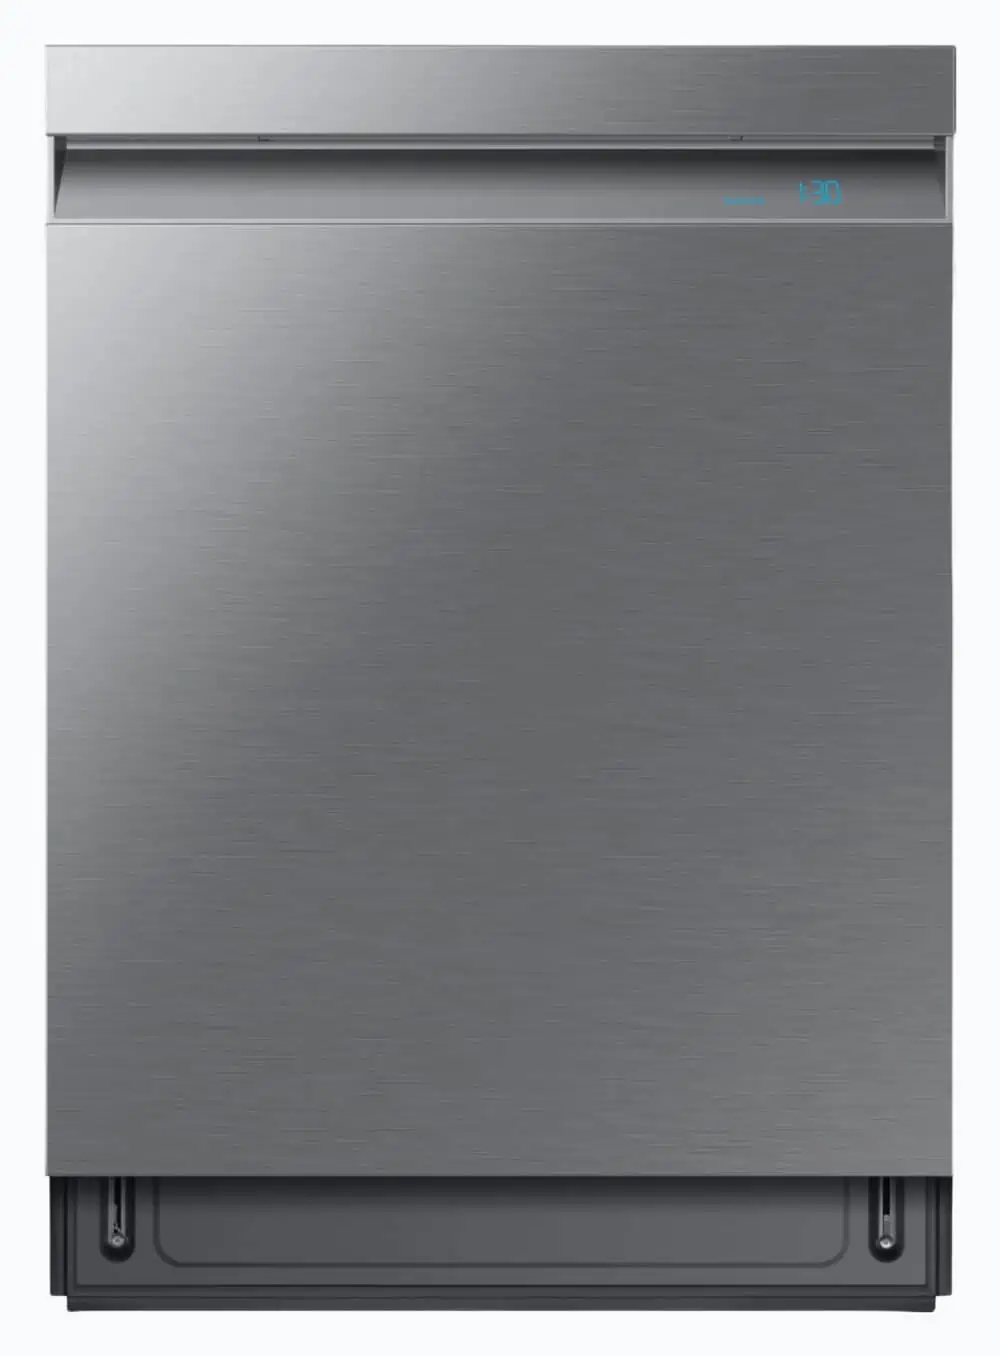 Product Image of the Samsung Linear Wash Dishwasher